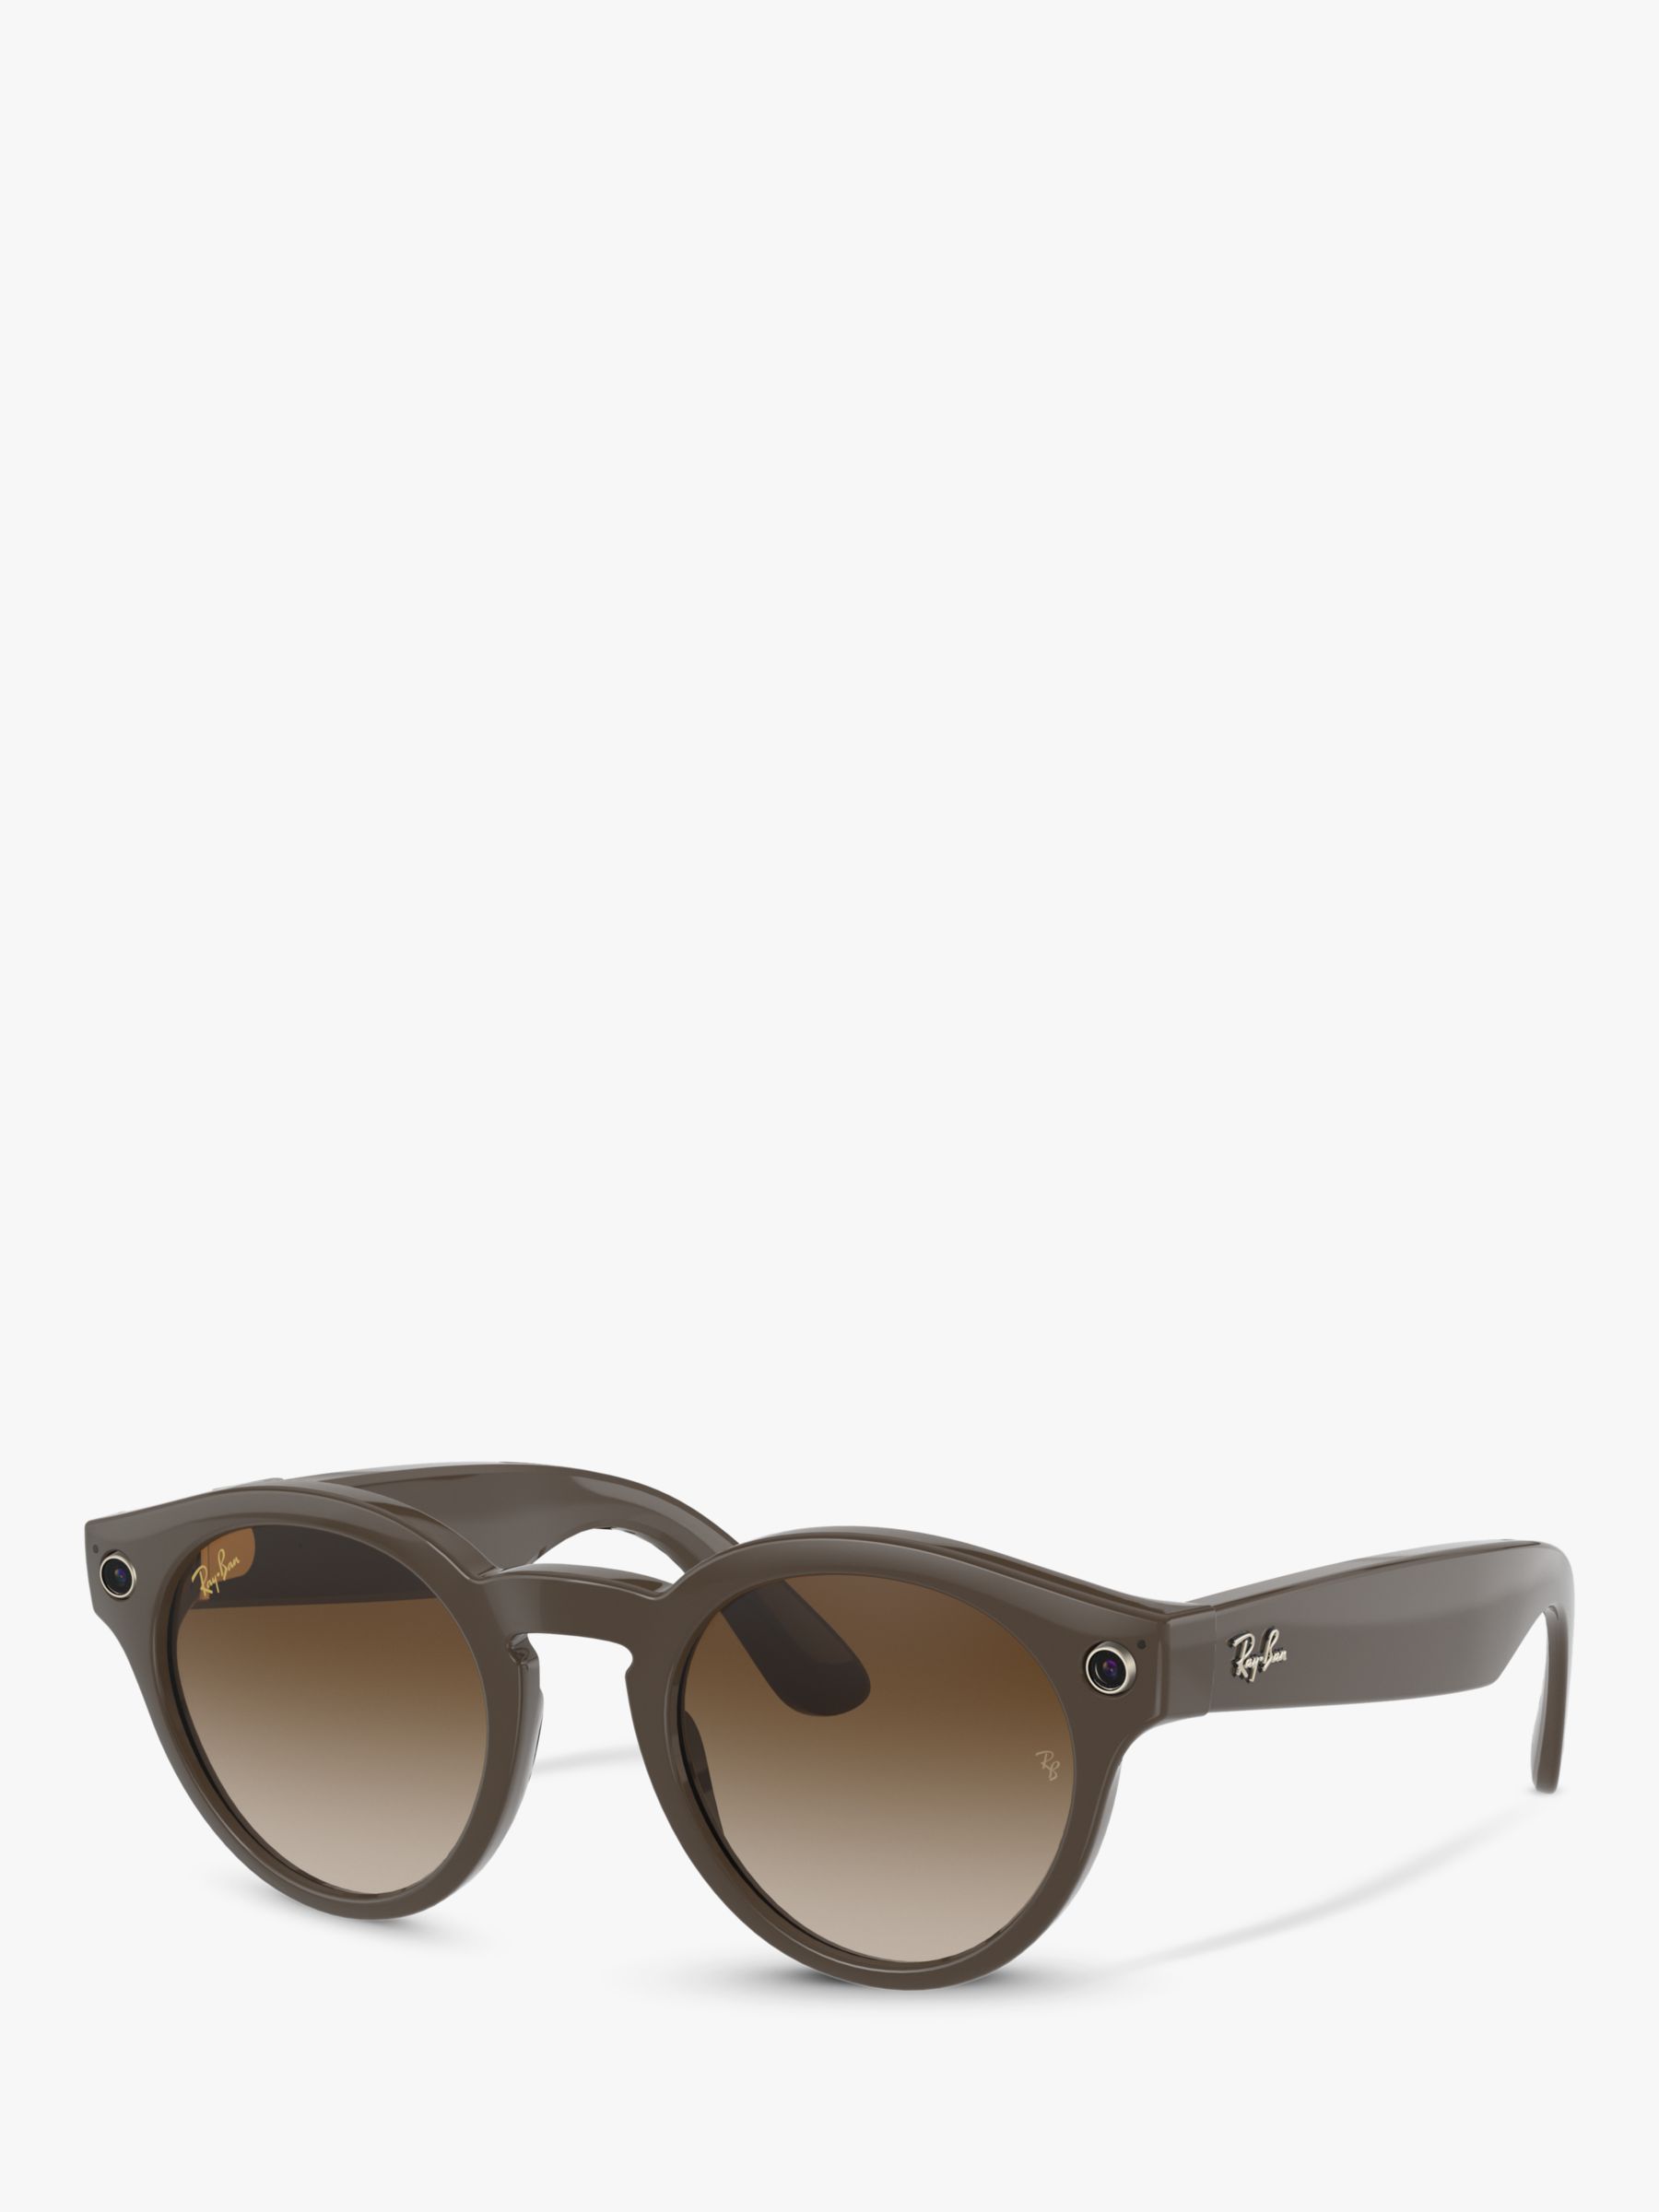 Ray-Ban Stories Round Smart Sunglasses, Shiny Brown/Gradient Brown at John  Lewis & Partners